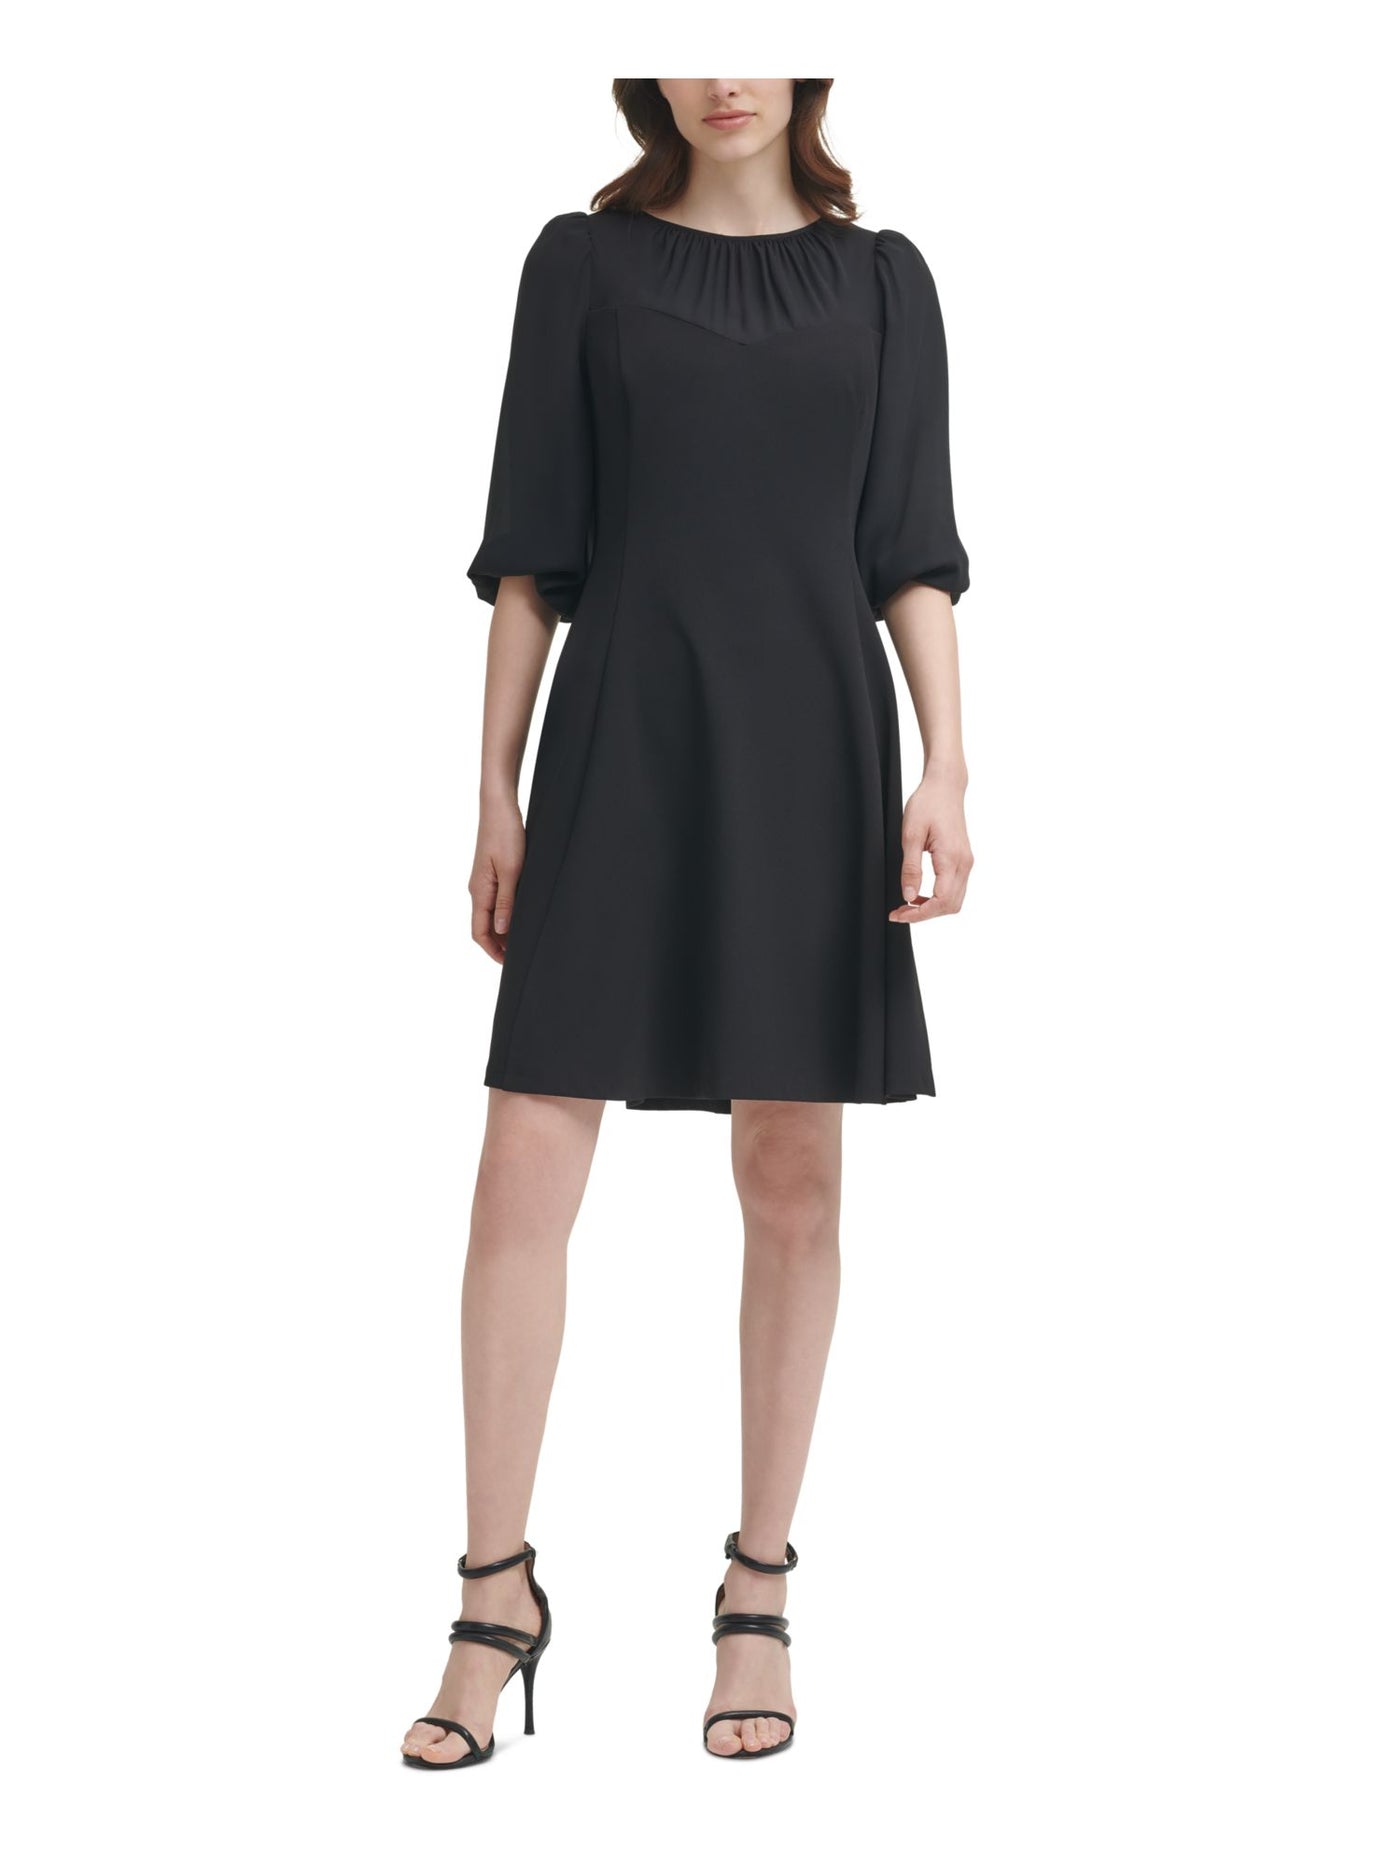 DKNY Womens Black Zippered Sheer Keyhole Back Unlined Pouf Sleeve Round Neck Above The Knee Cocktail Fit + Flare Dress 8